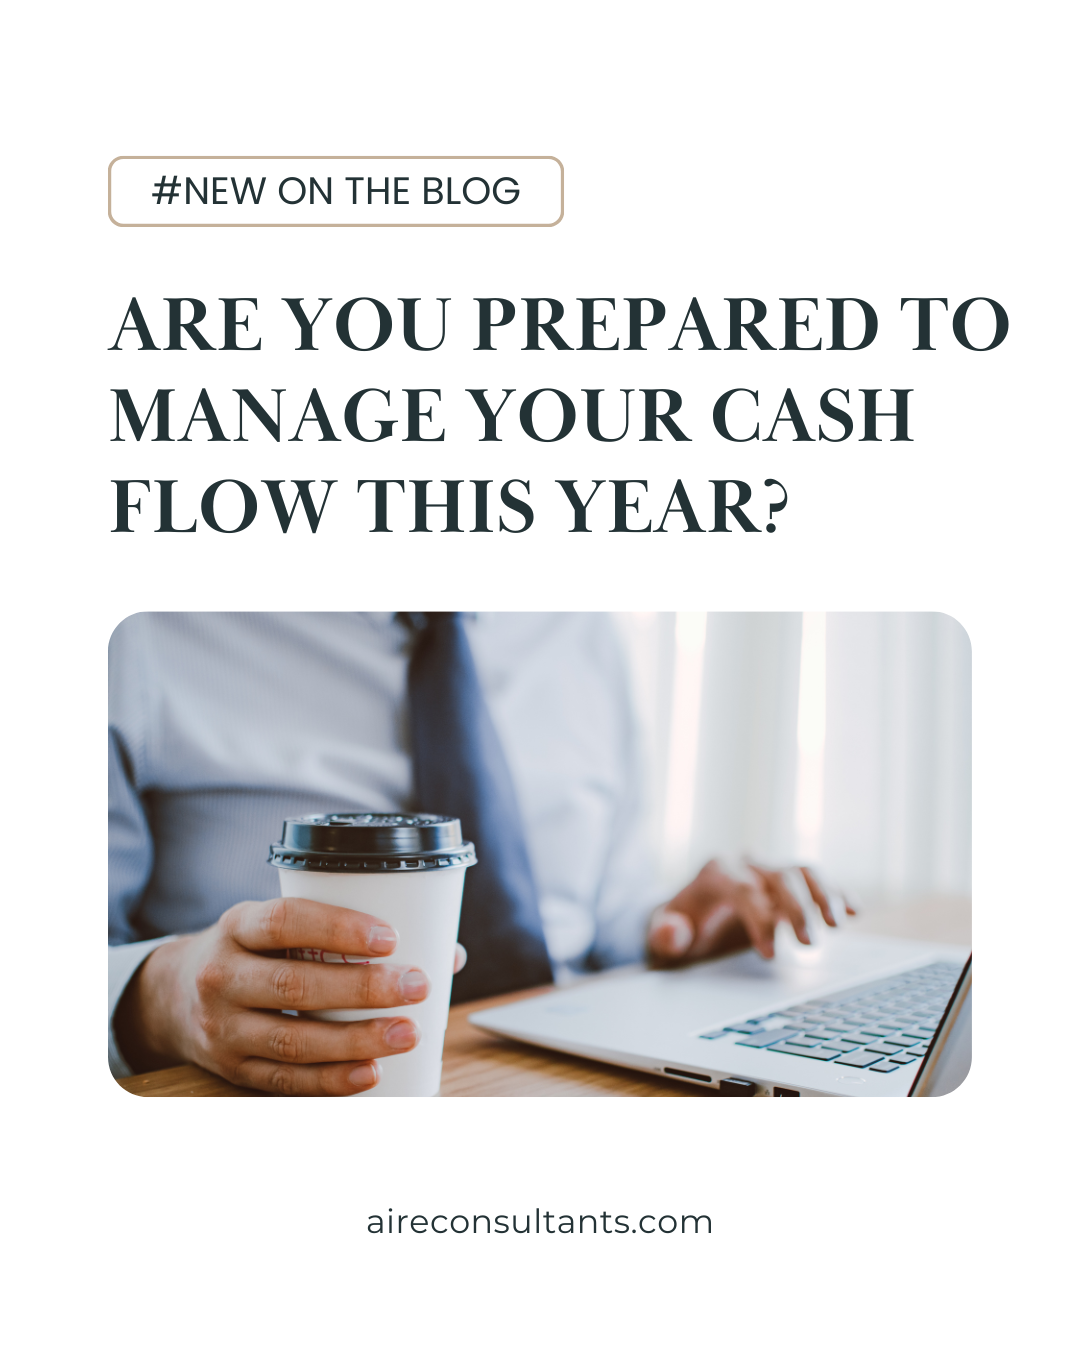 Are you prepared to manage your cash flow this year?